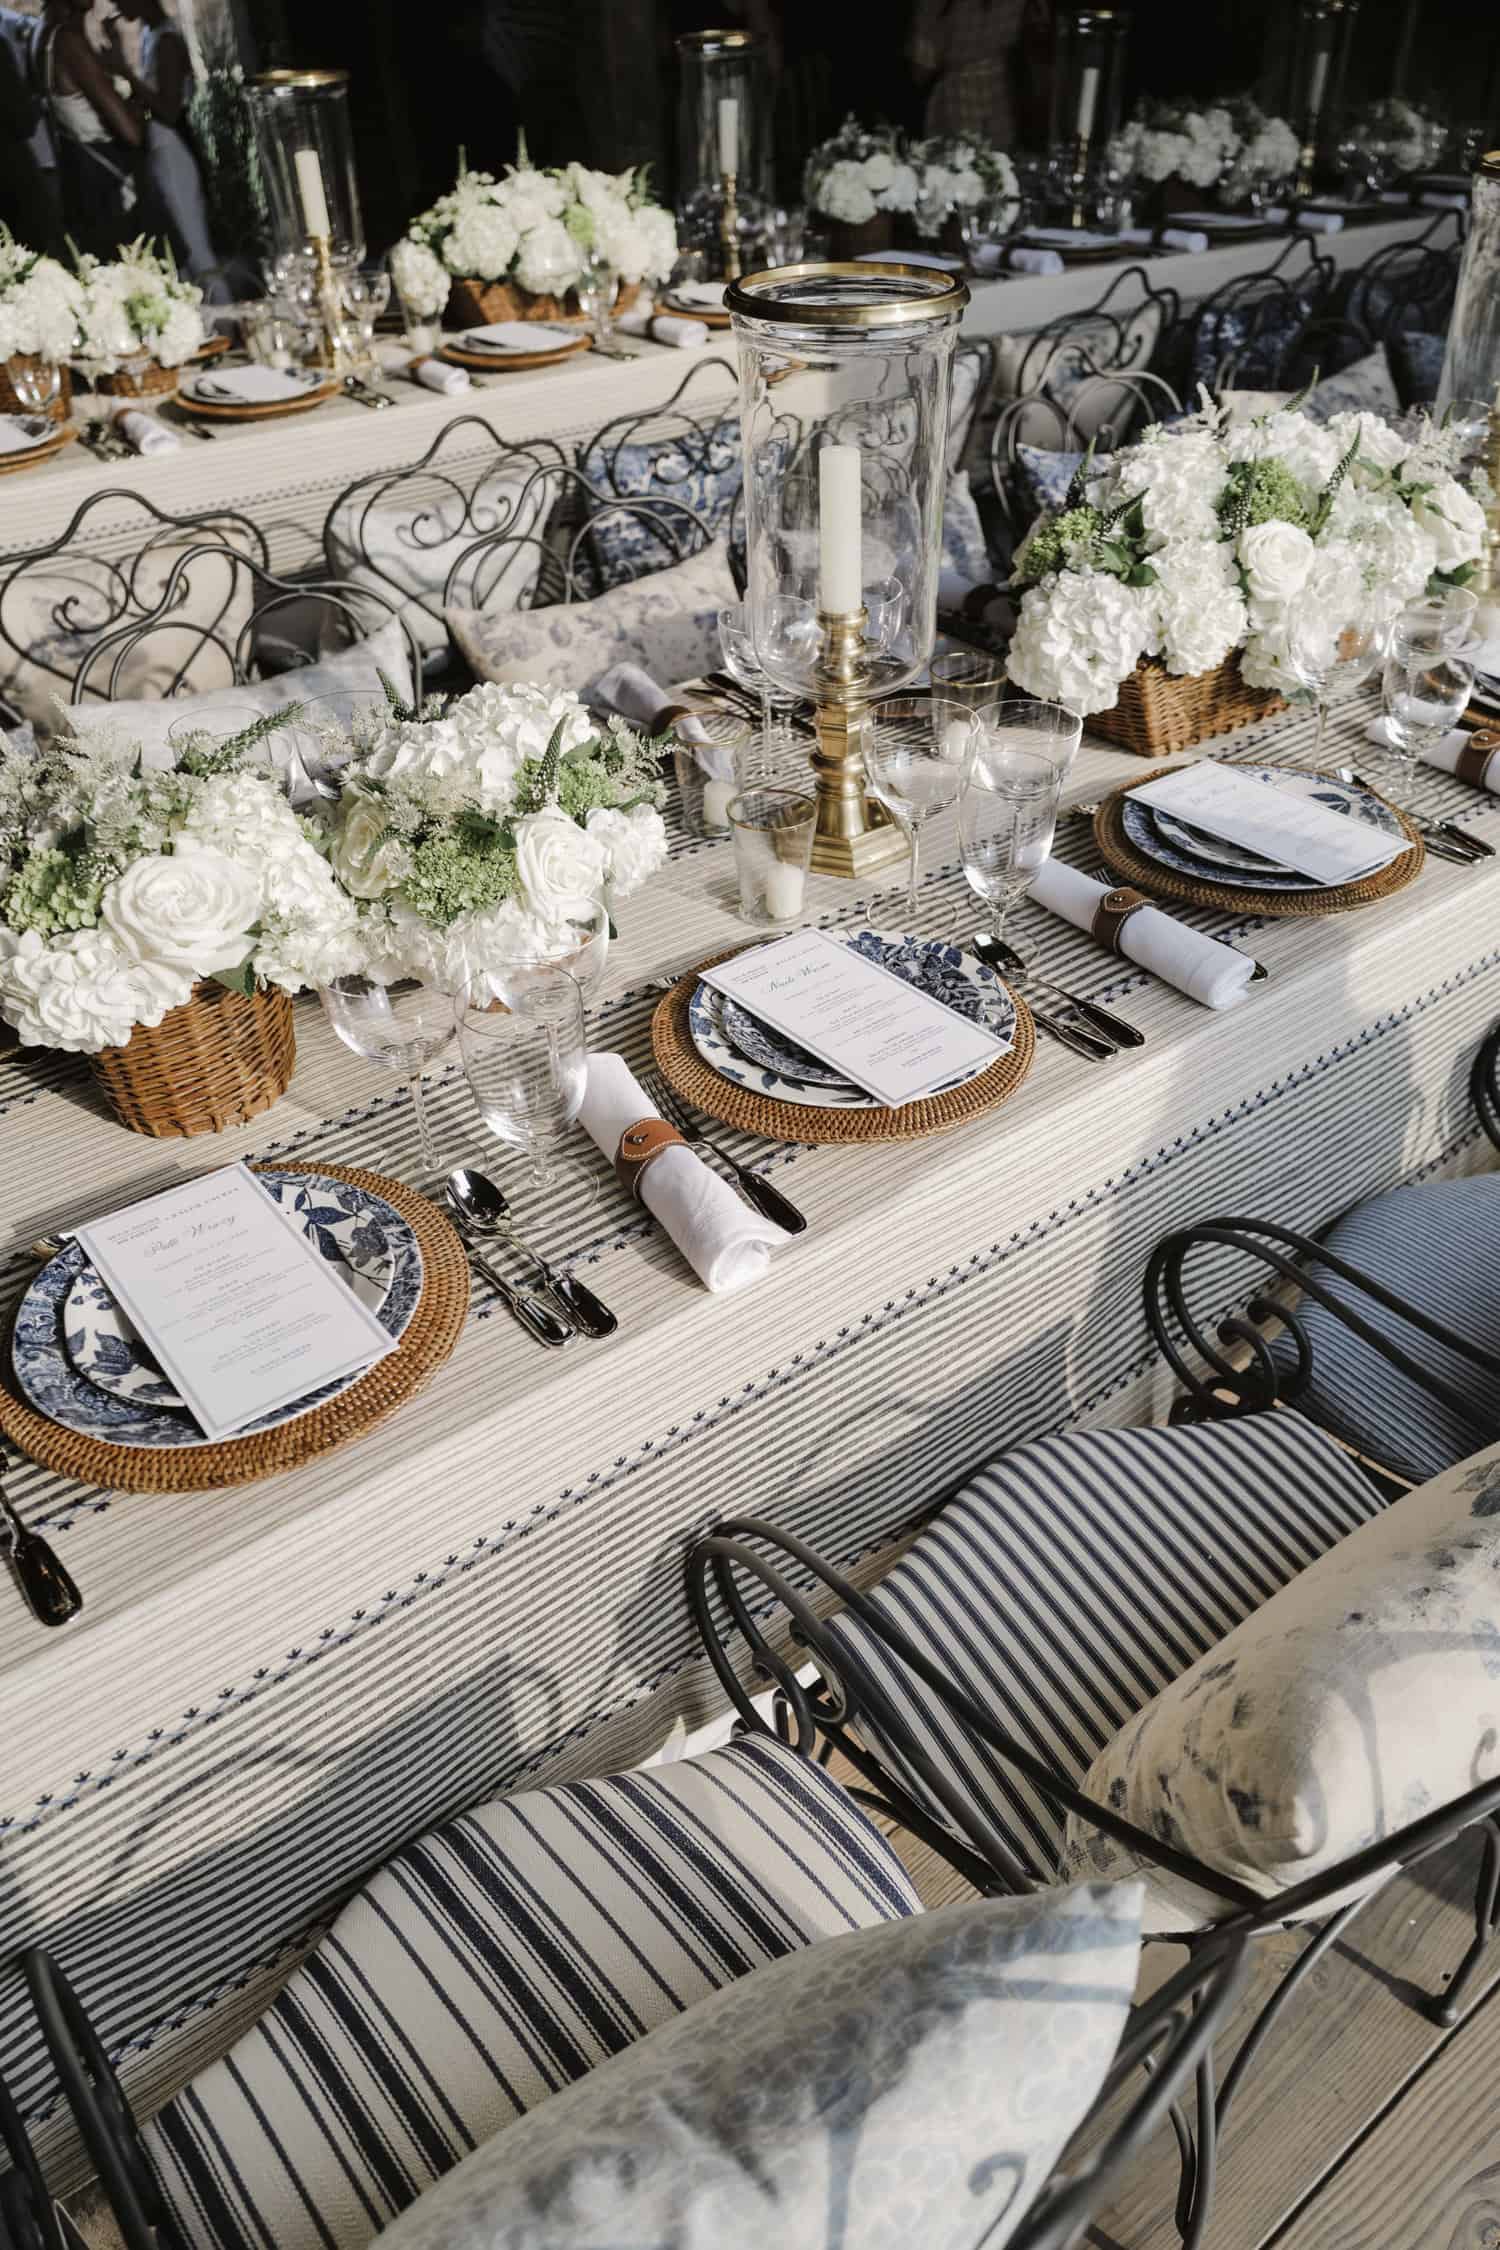 Ralph Lauren, Net-a-Porter, And Mr. Porter Hosted A Barn Dinner With A  Difference In East Hampton